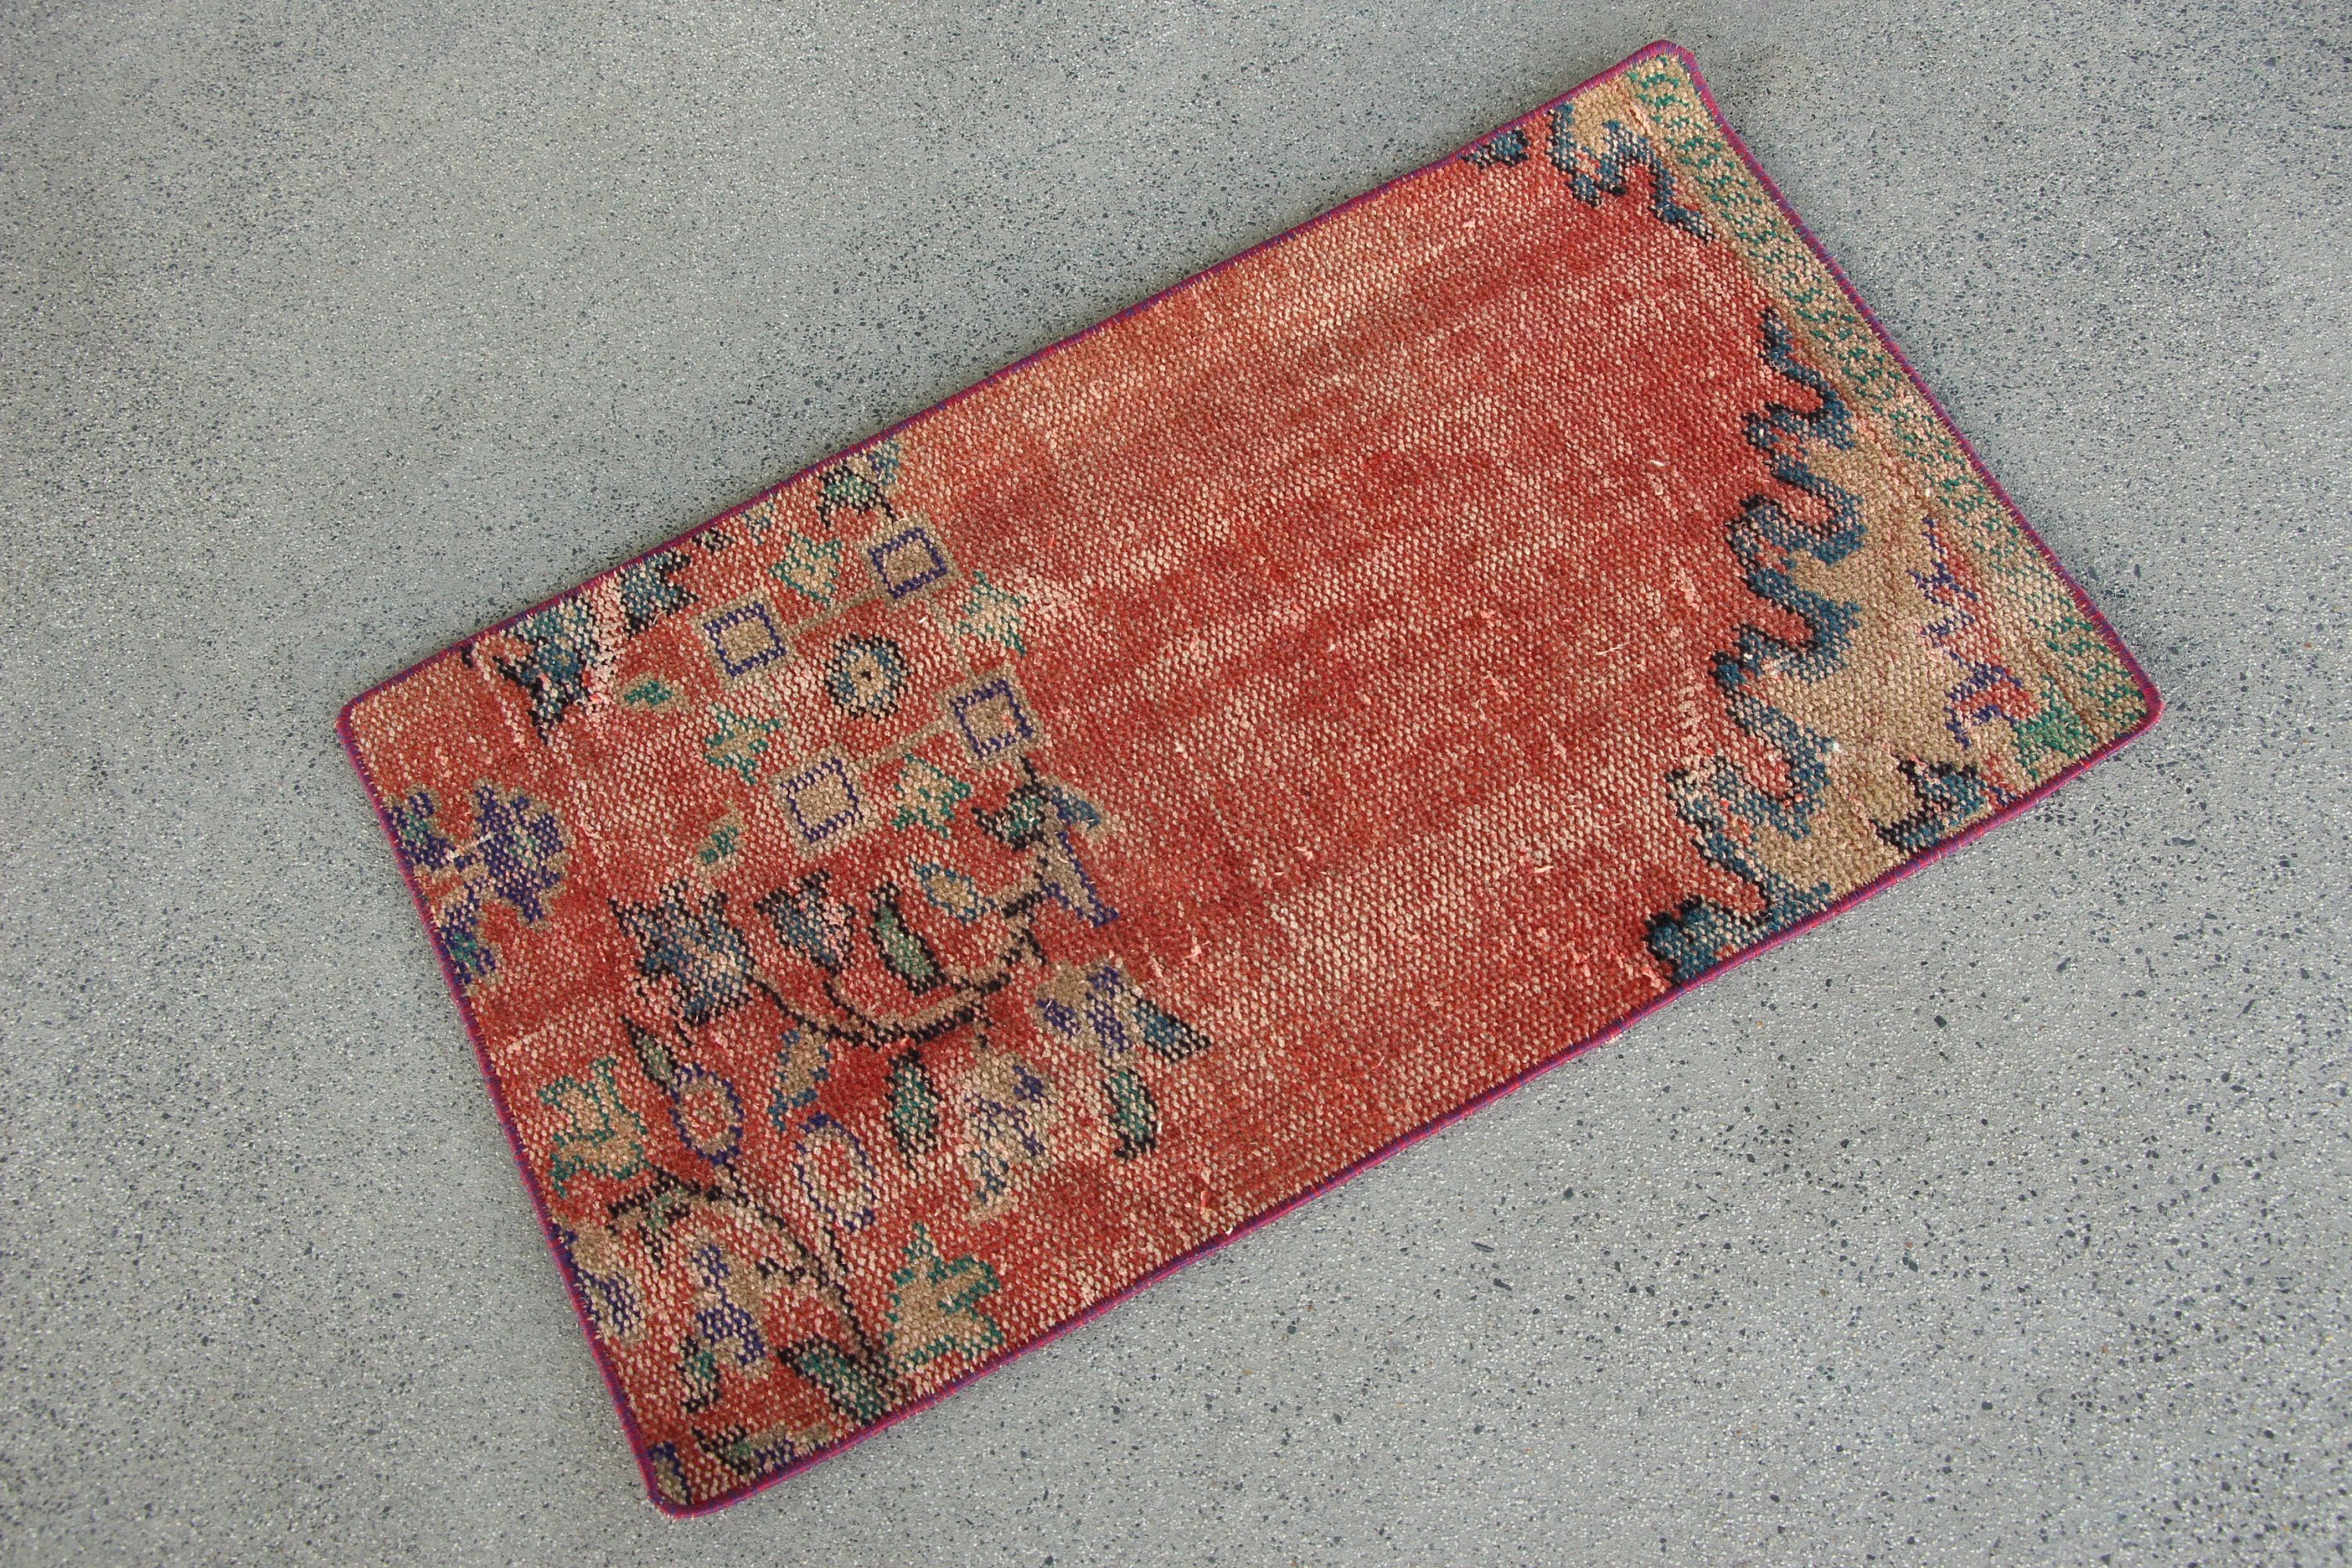 Turkish Rugs, Red Moroccan Rug, Vintage Rug, Entry Rugs, Rugs for Bedroom, 1.6x2.8 ft Small Rugs, Anatolian Rug, Kitchen Rug